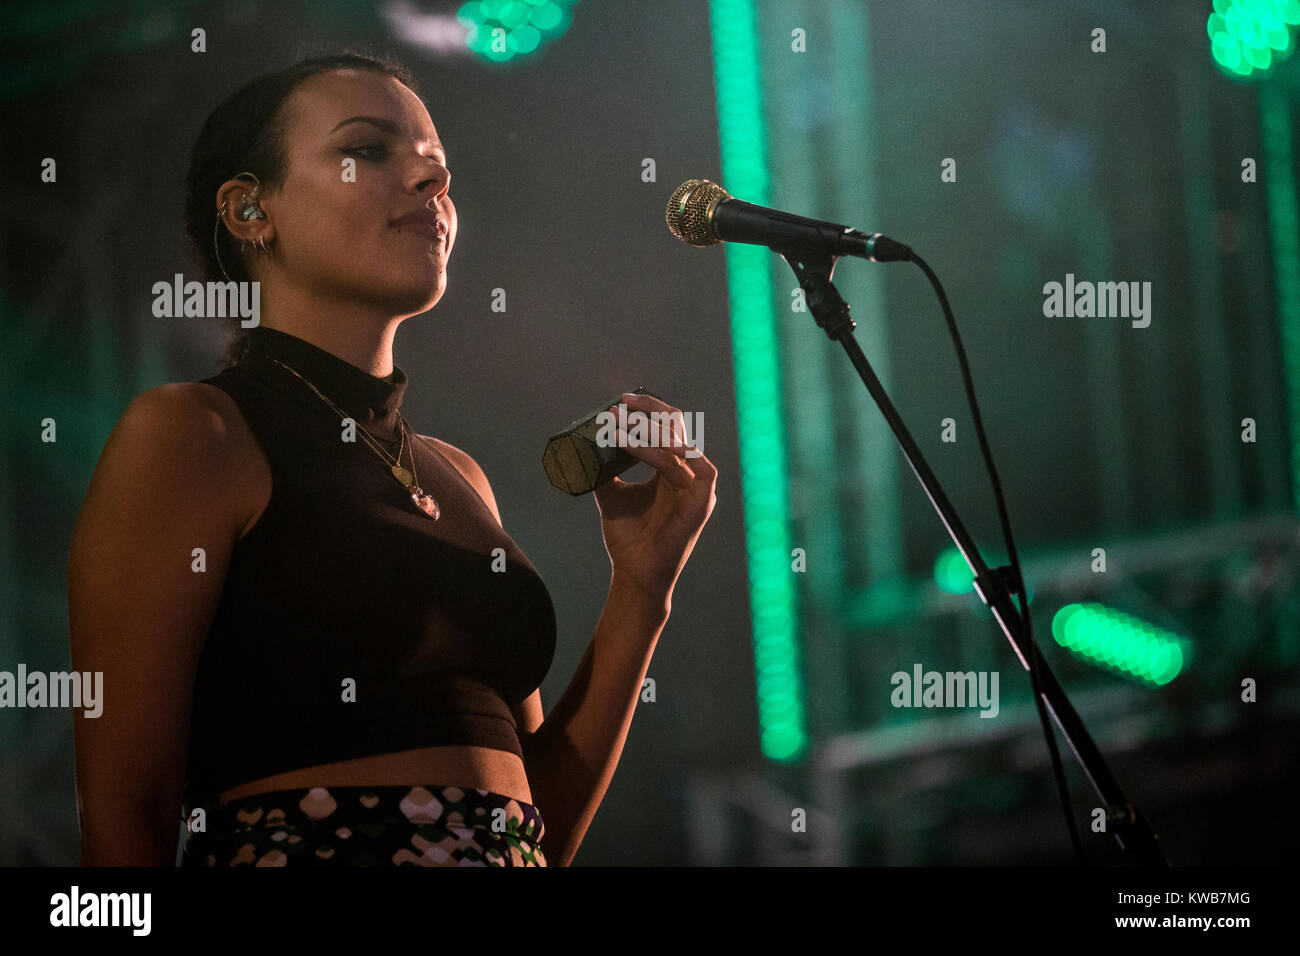 The British band and music collective Jungle performs a live concert at Avelon Stage at at Danish music festival Roskilde Festival 2015. Here backing singer Rudi Salmon is pictured live on stage. Denmark, 02/07 2015. Stock Photo